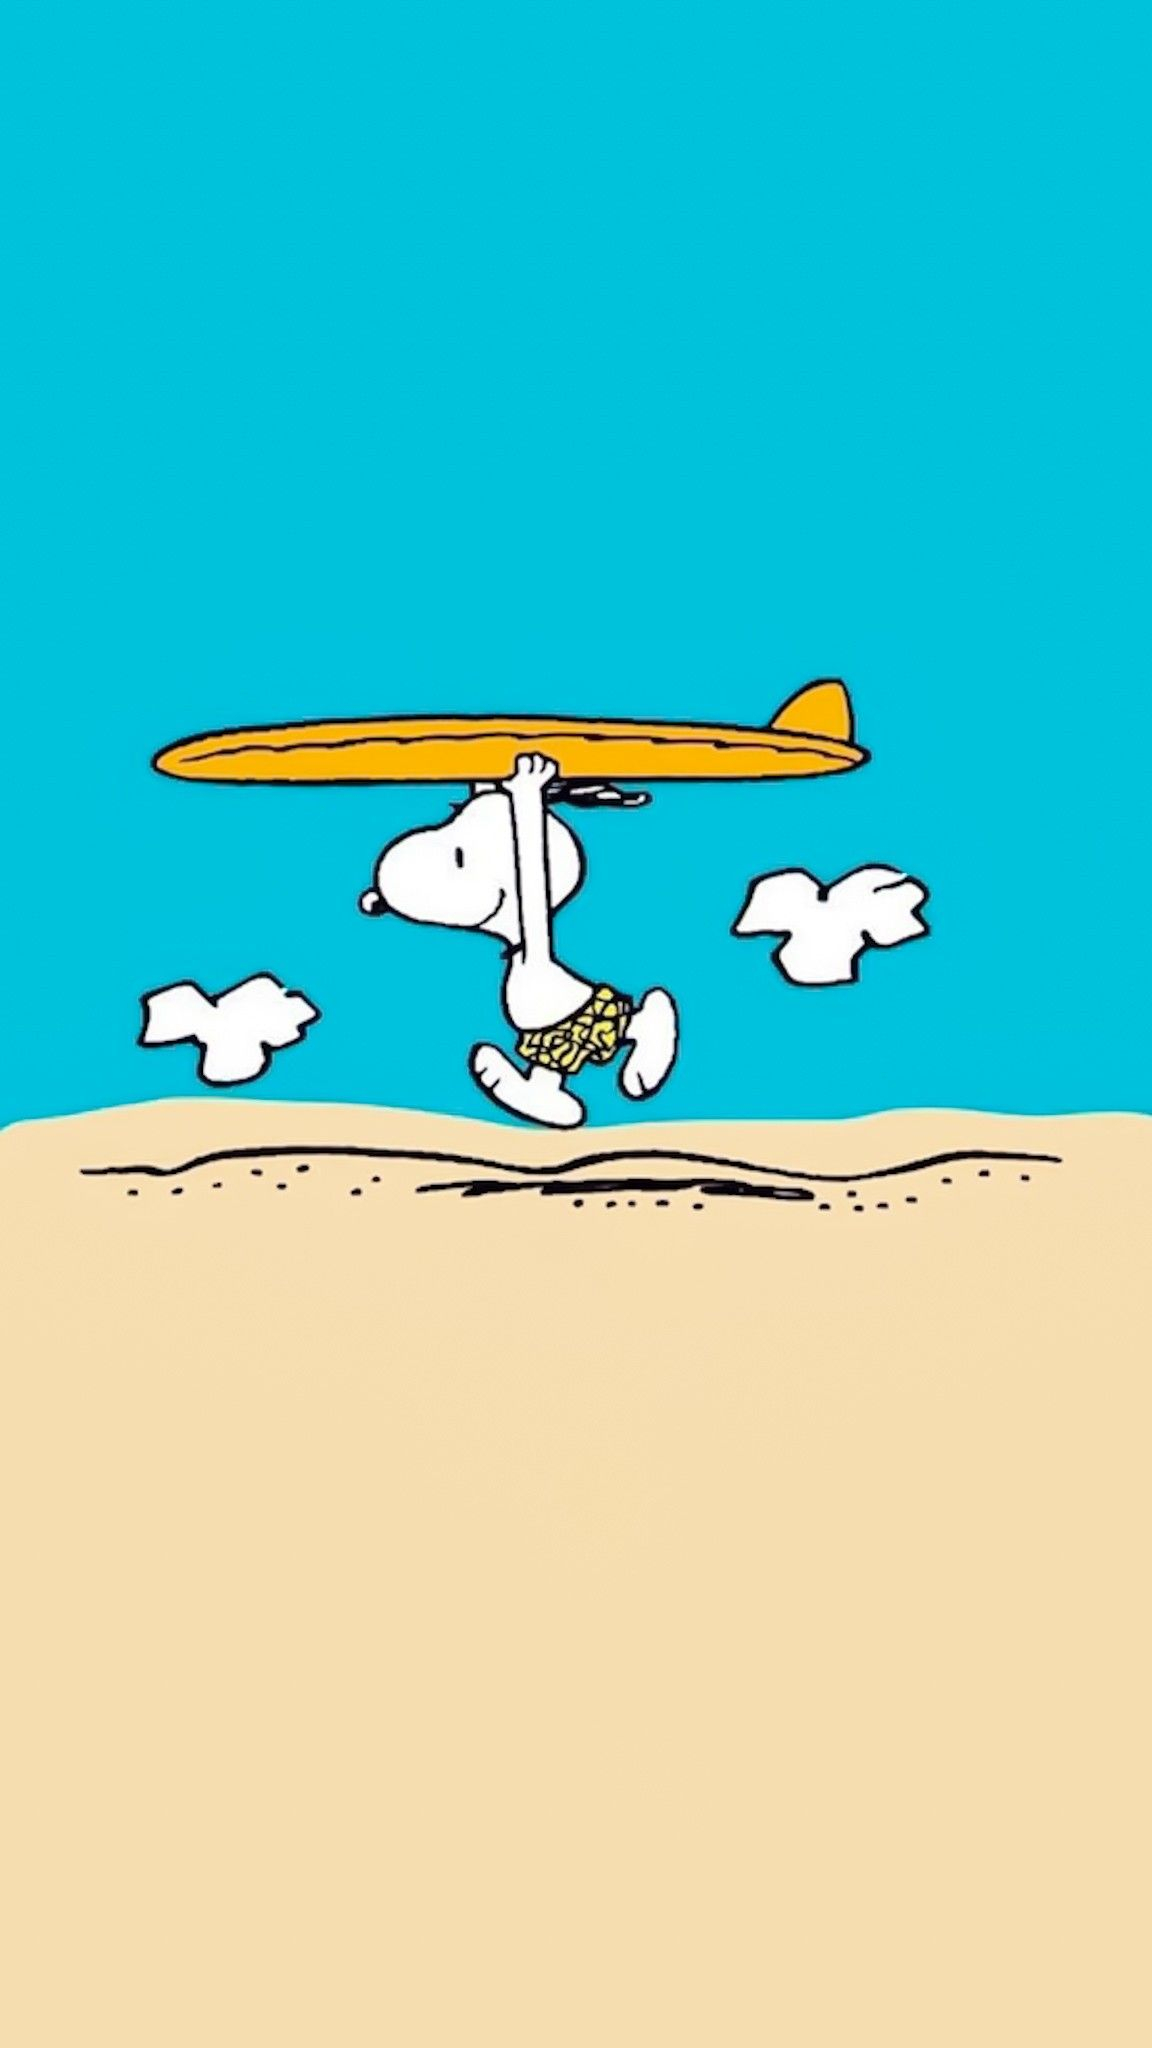 1152x2048 Pin by Aekkalisa on Snoopy | Snoopy wallpaper, Snoopy pictures, Snoopy images